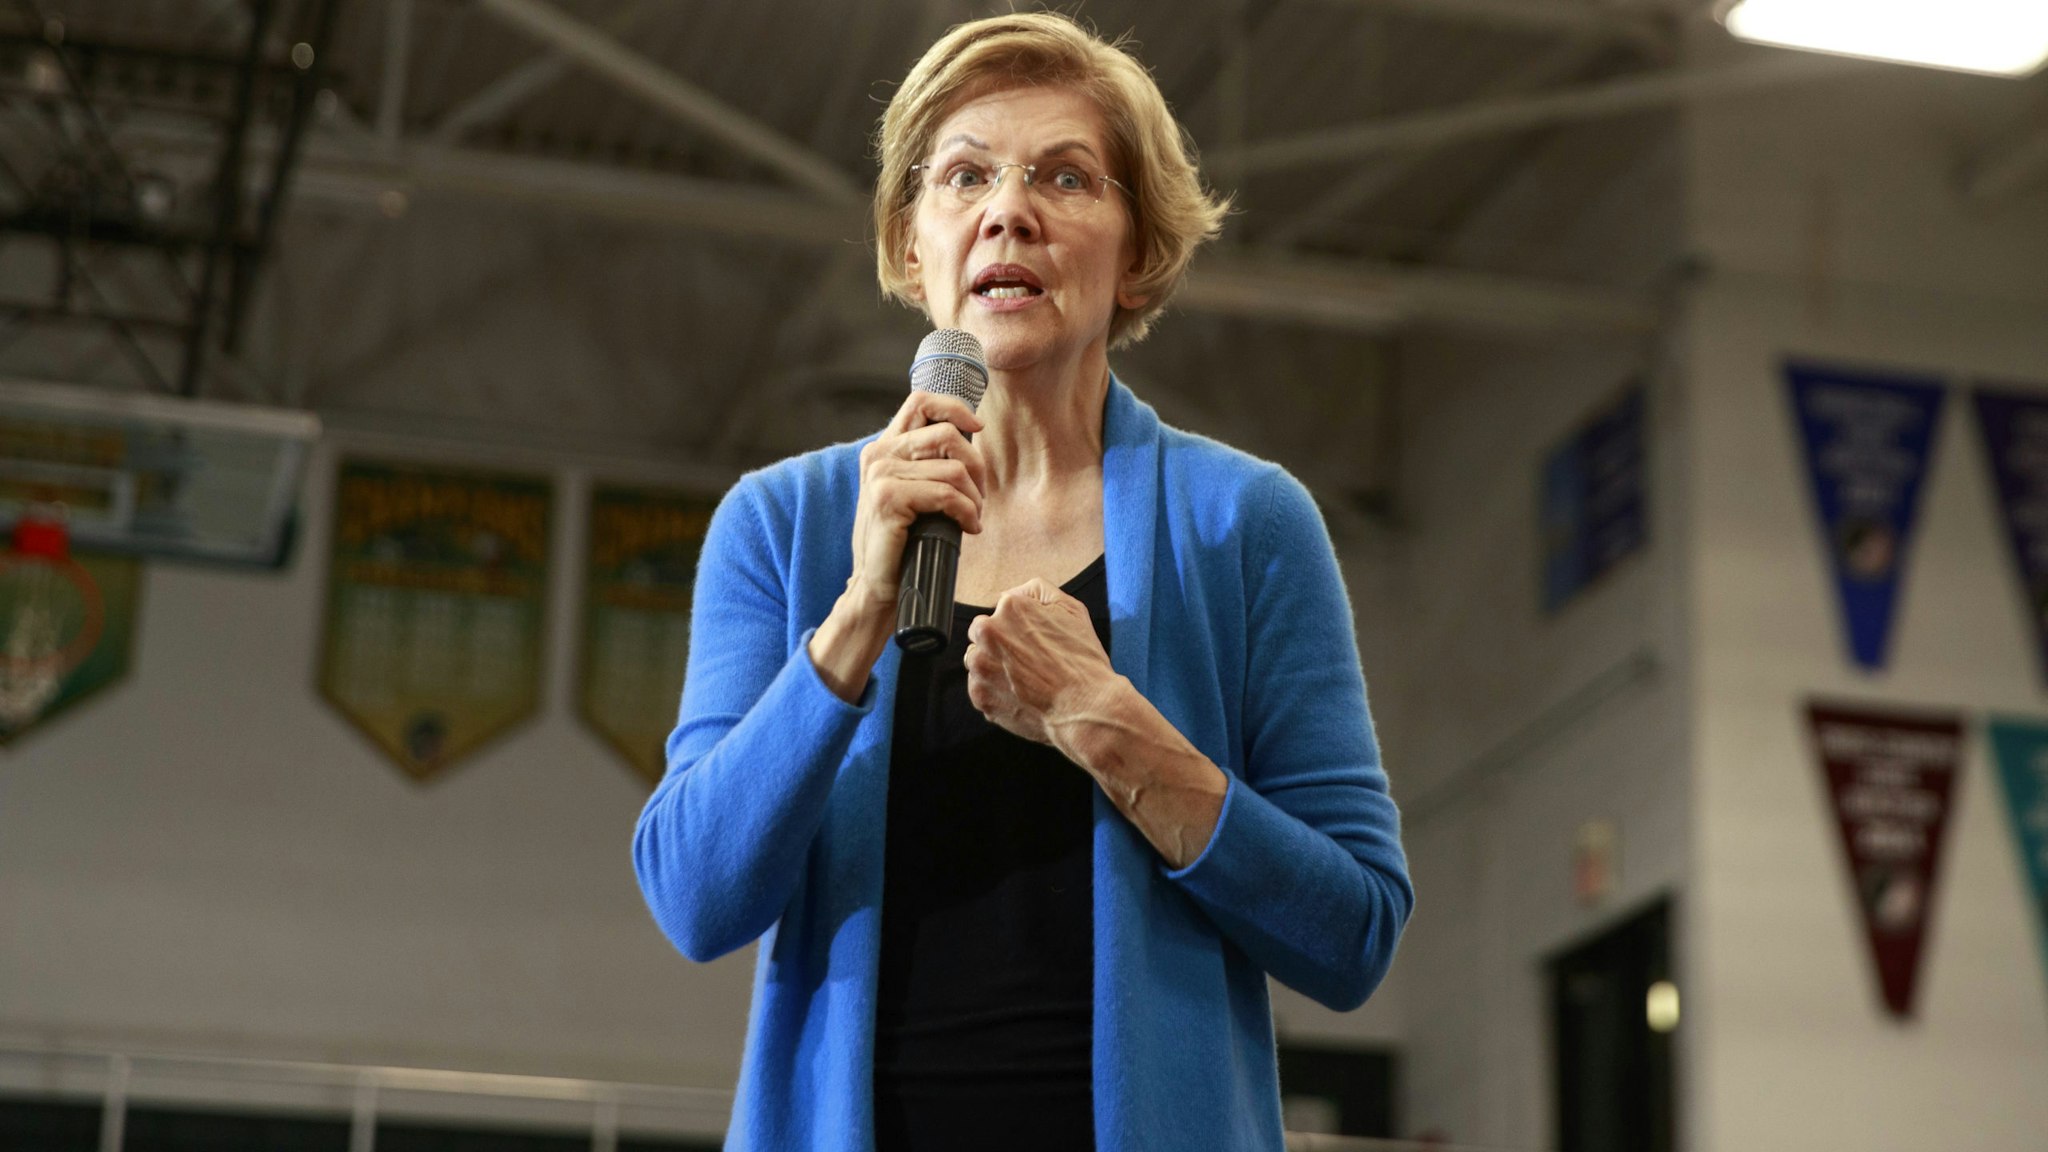 IOWA CITY, UNITED STATES - FEBRUARY 01 2020: Democratic presidential candidate Elizabeth Warren campaigns two days before the Iowa Caucus